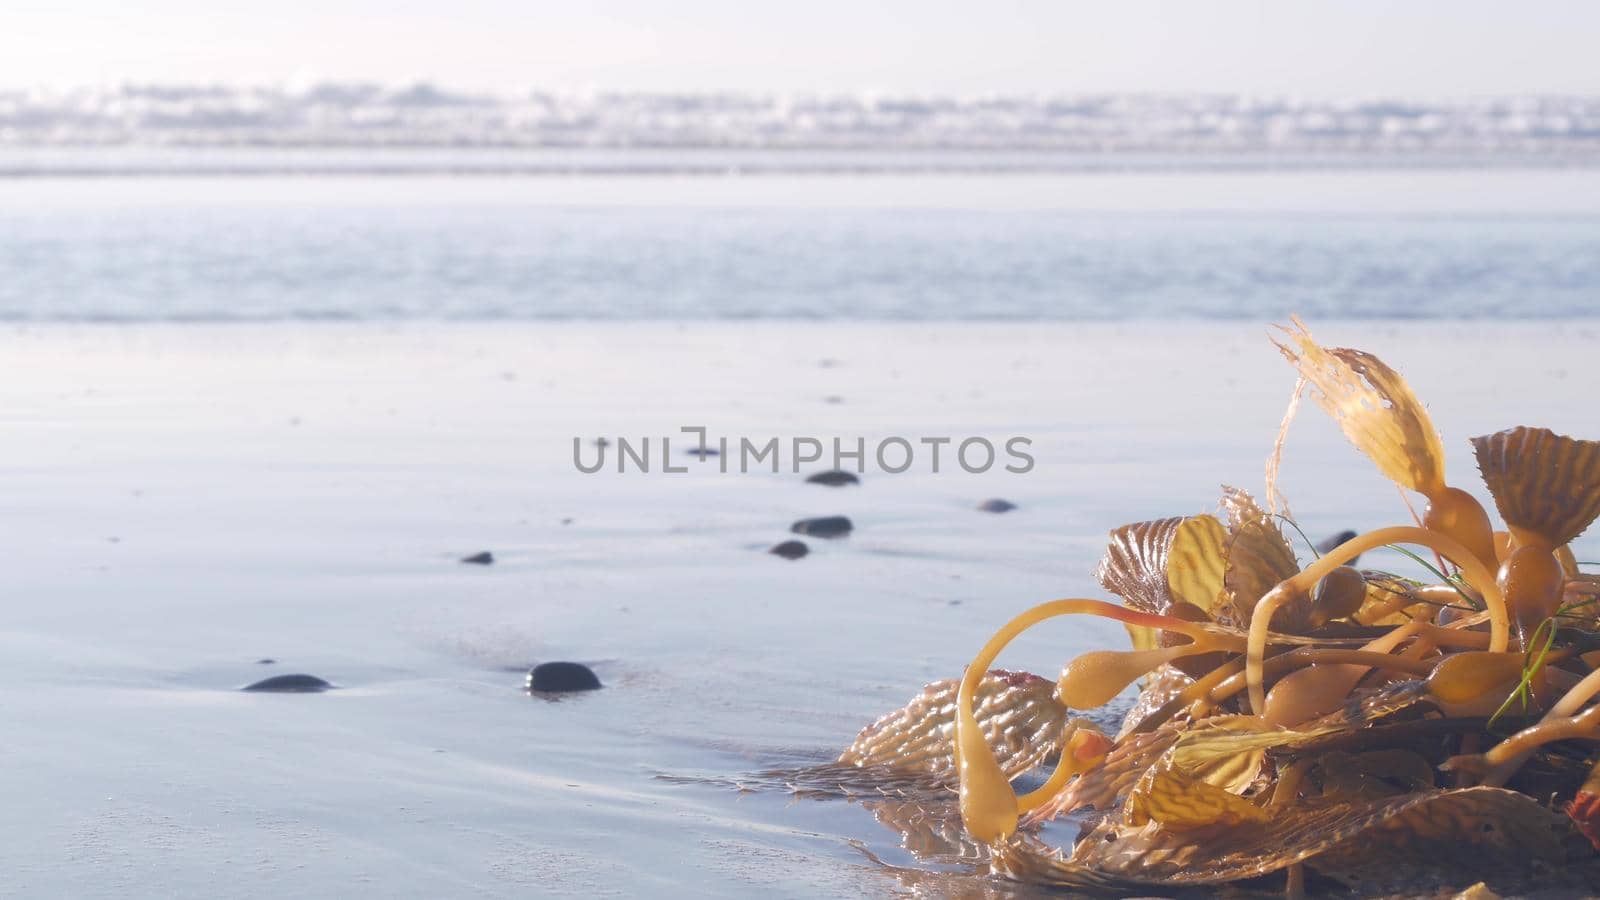 Green kelp seaweed on beach littoral sand, California ocean coast nature, USA. Wet brown algae by sea water waves, low angle close up view. Pacific shore calm aesthetic. Seamless looped cinemagraph.